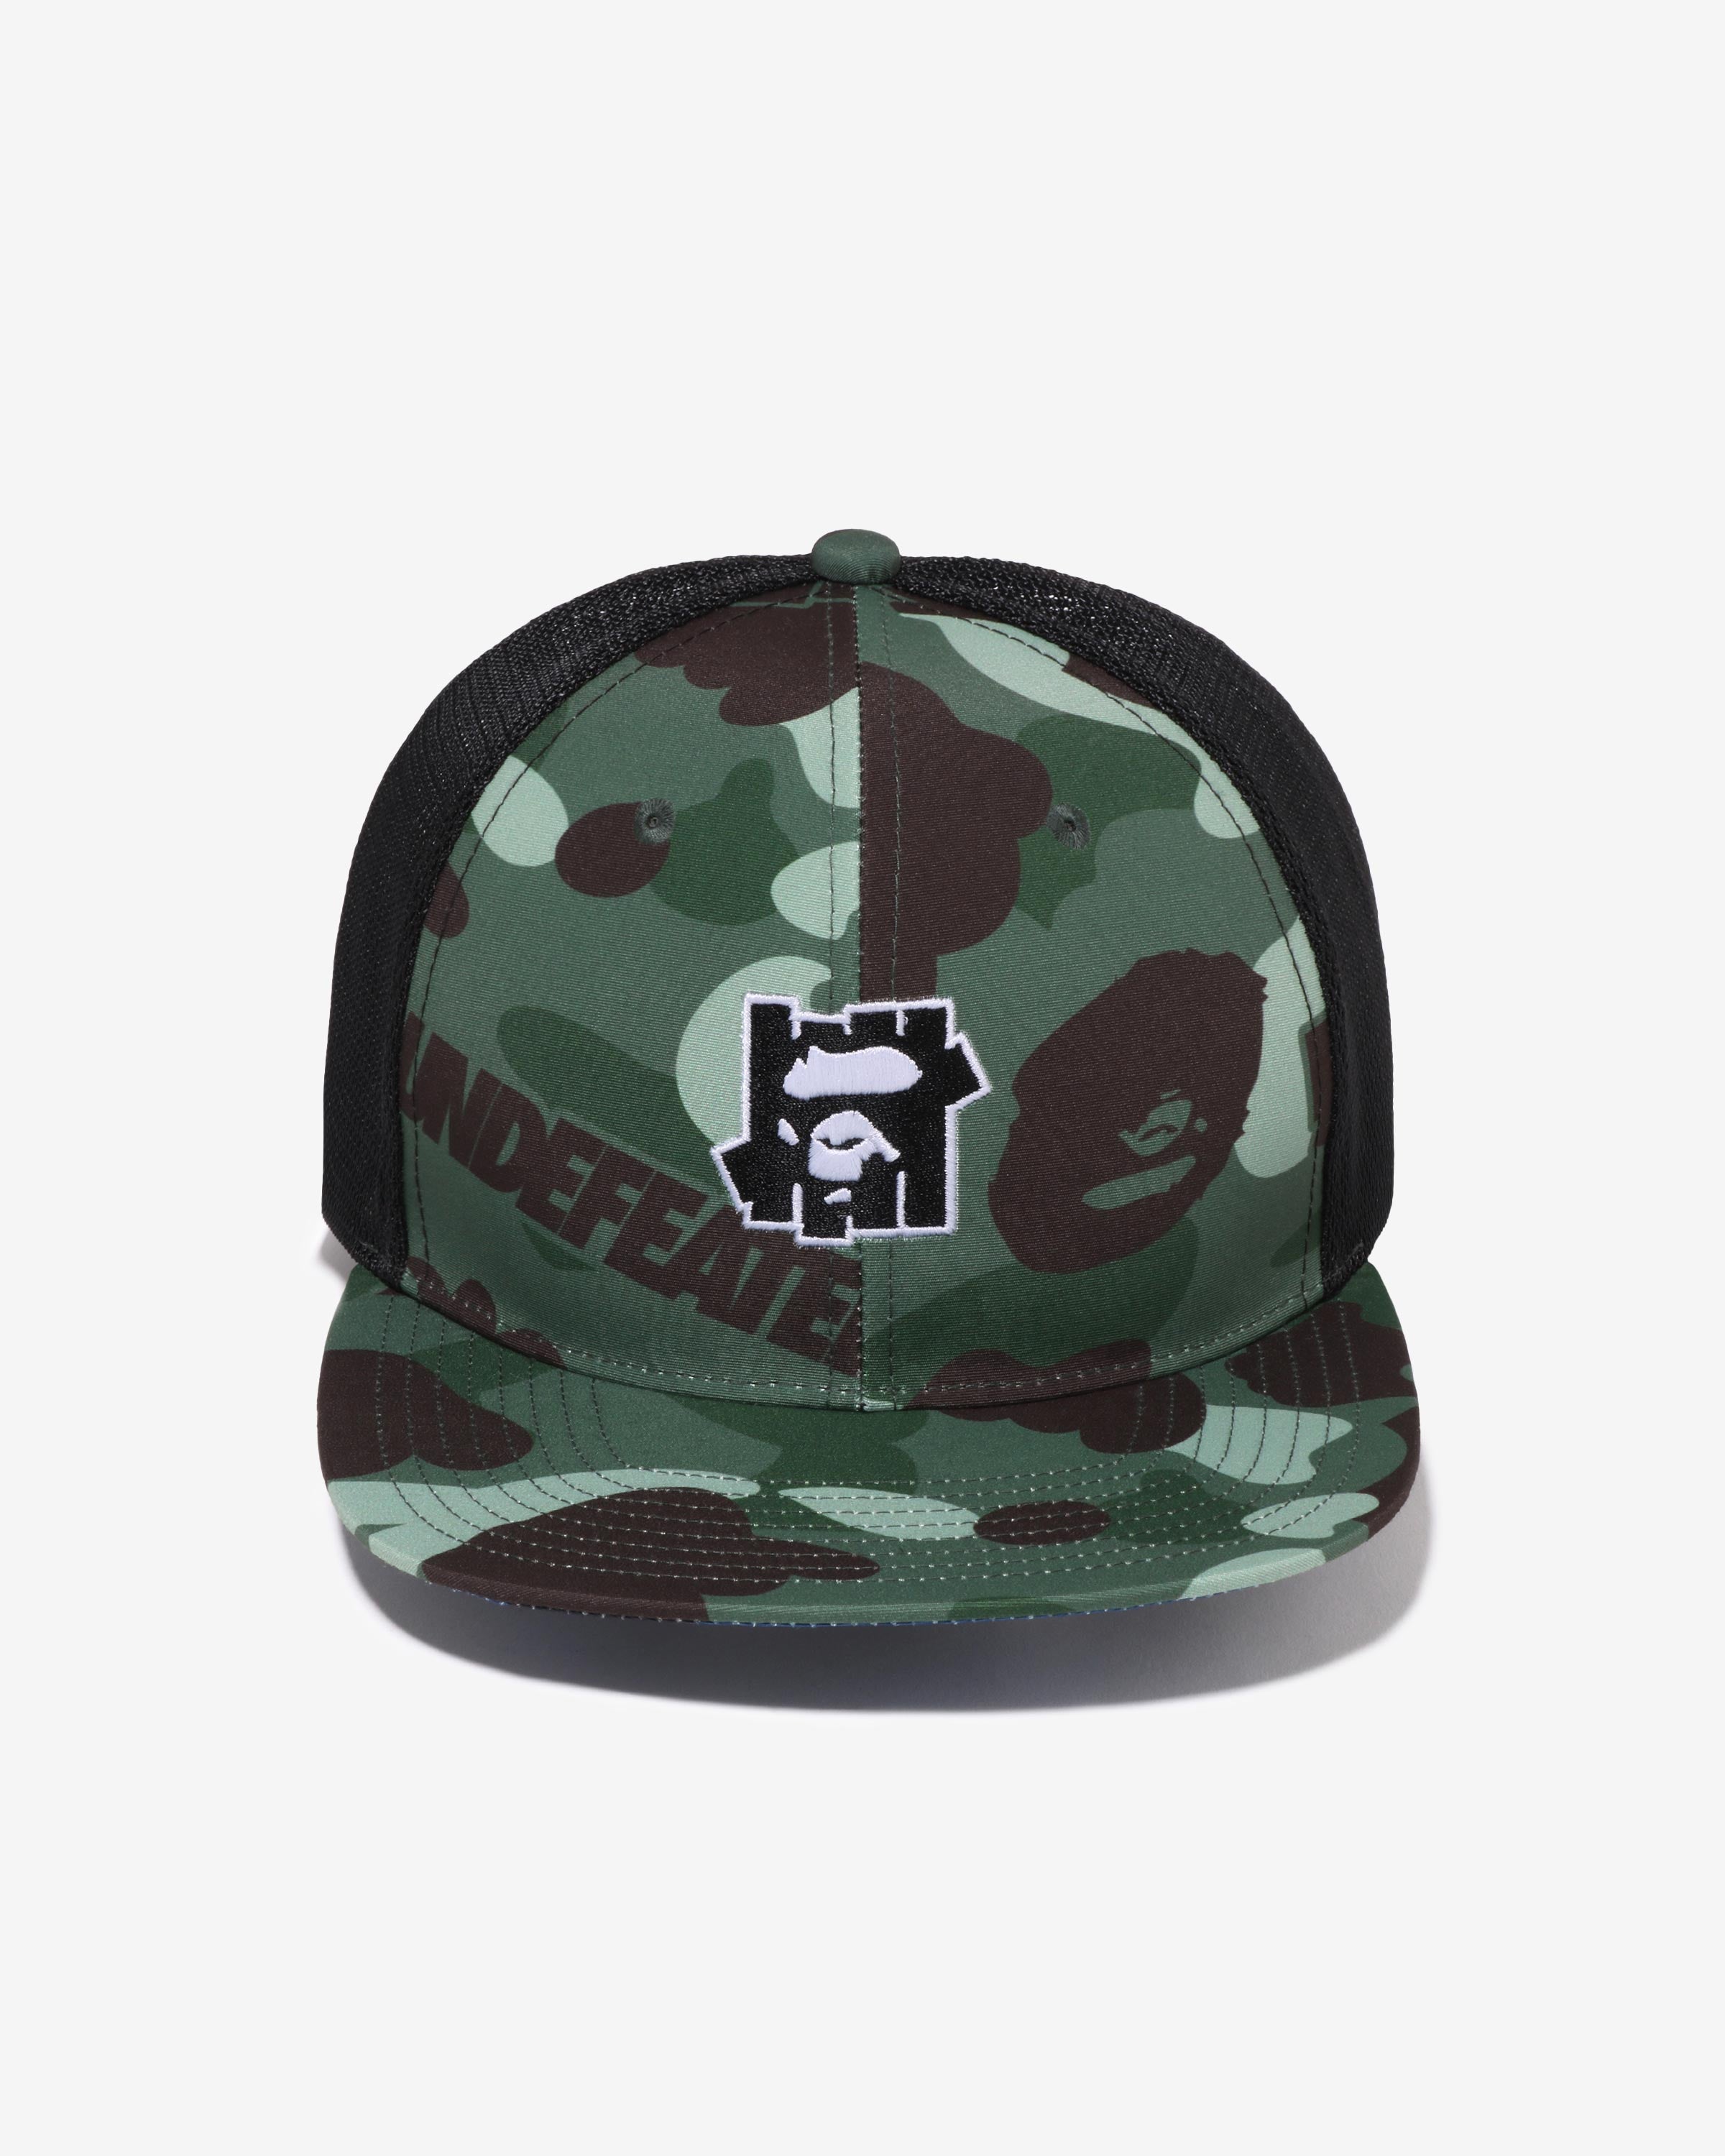 BAPE X UNDEFEATED MESH HAT – Undefeated